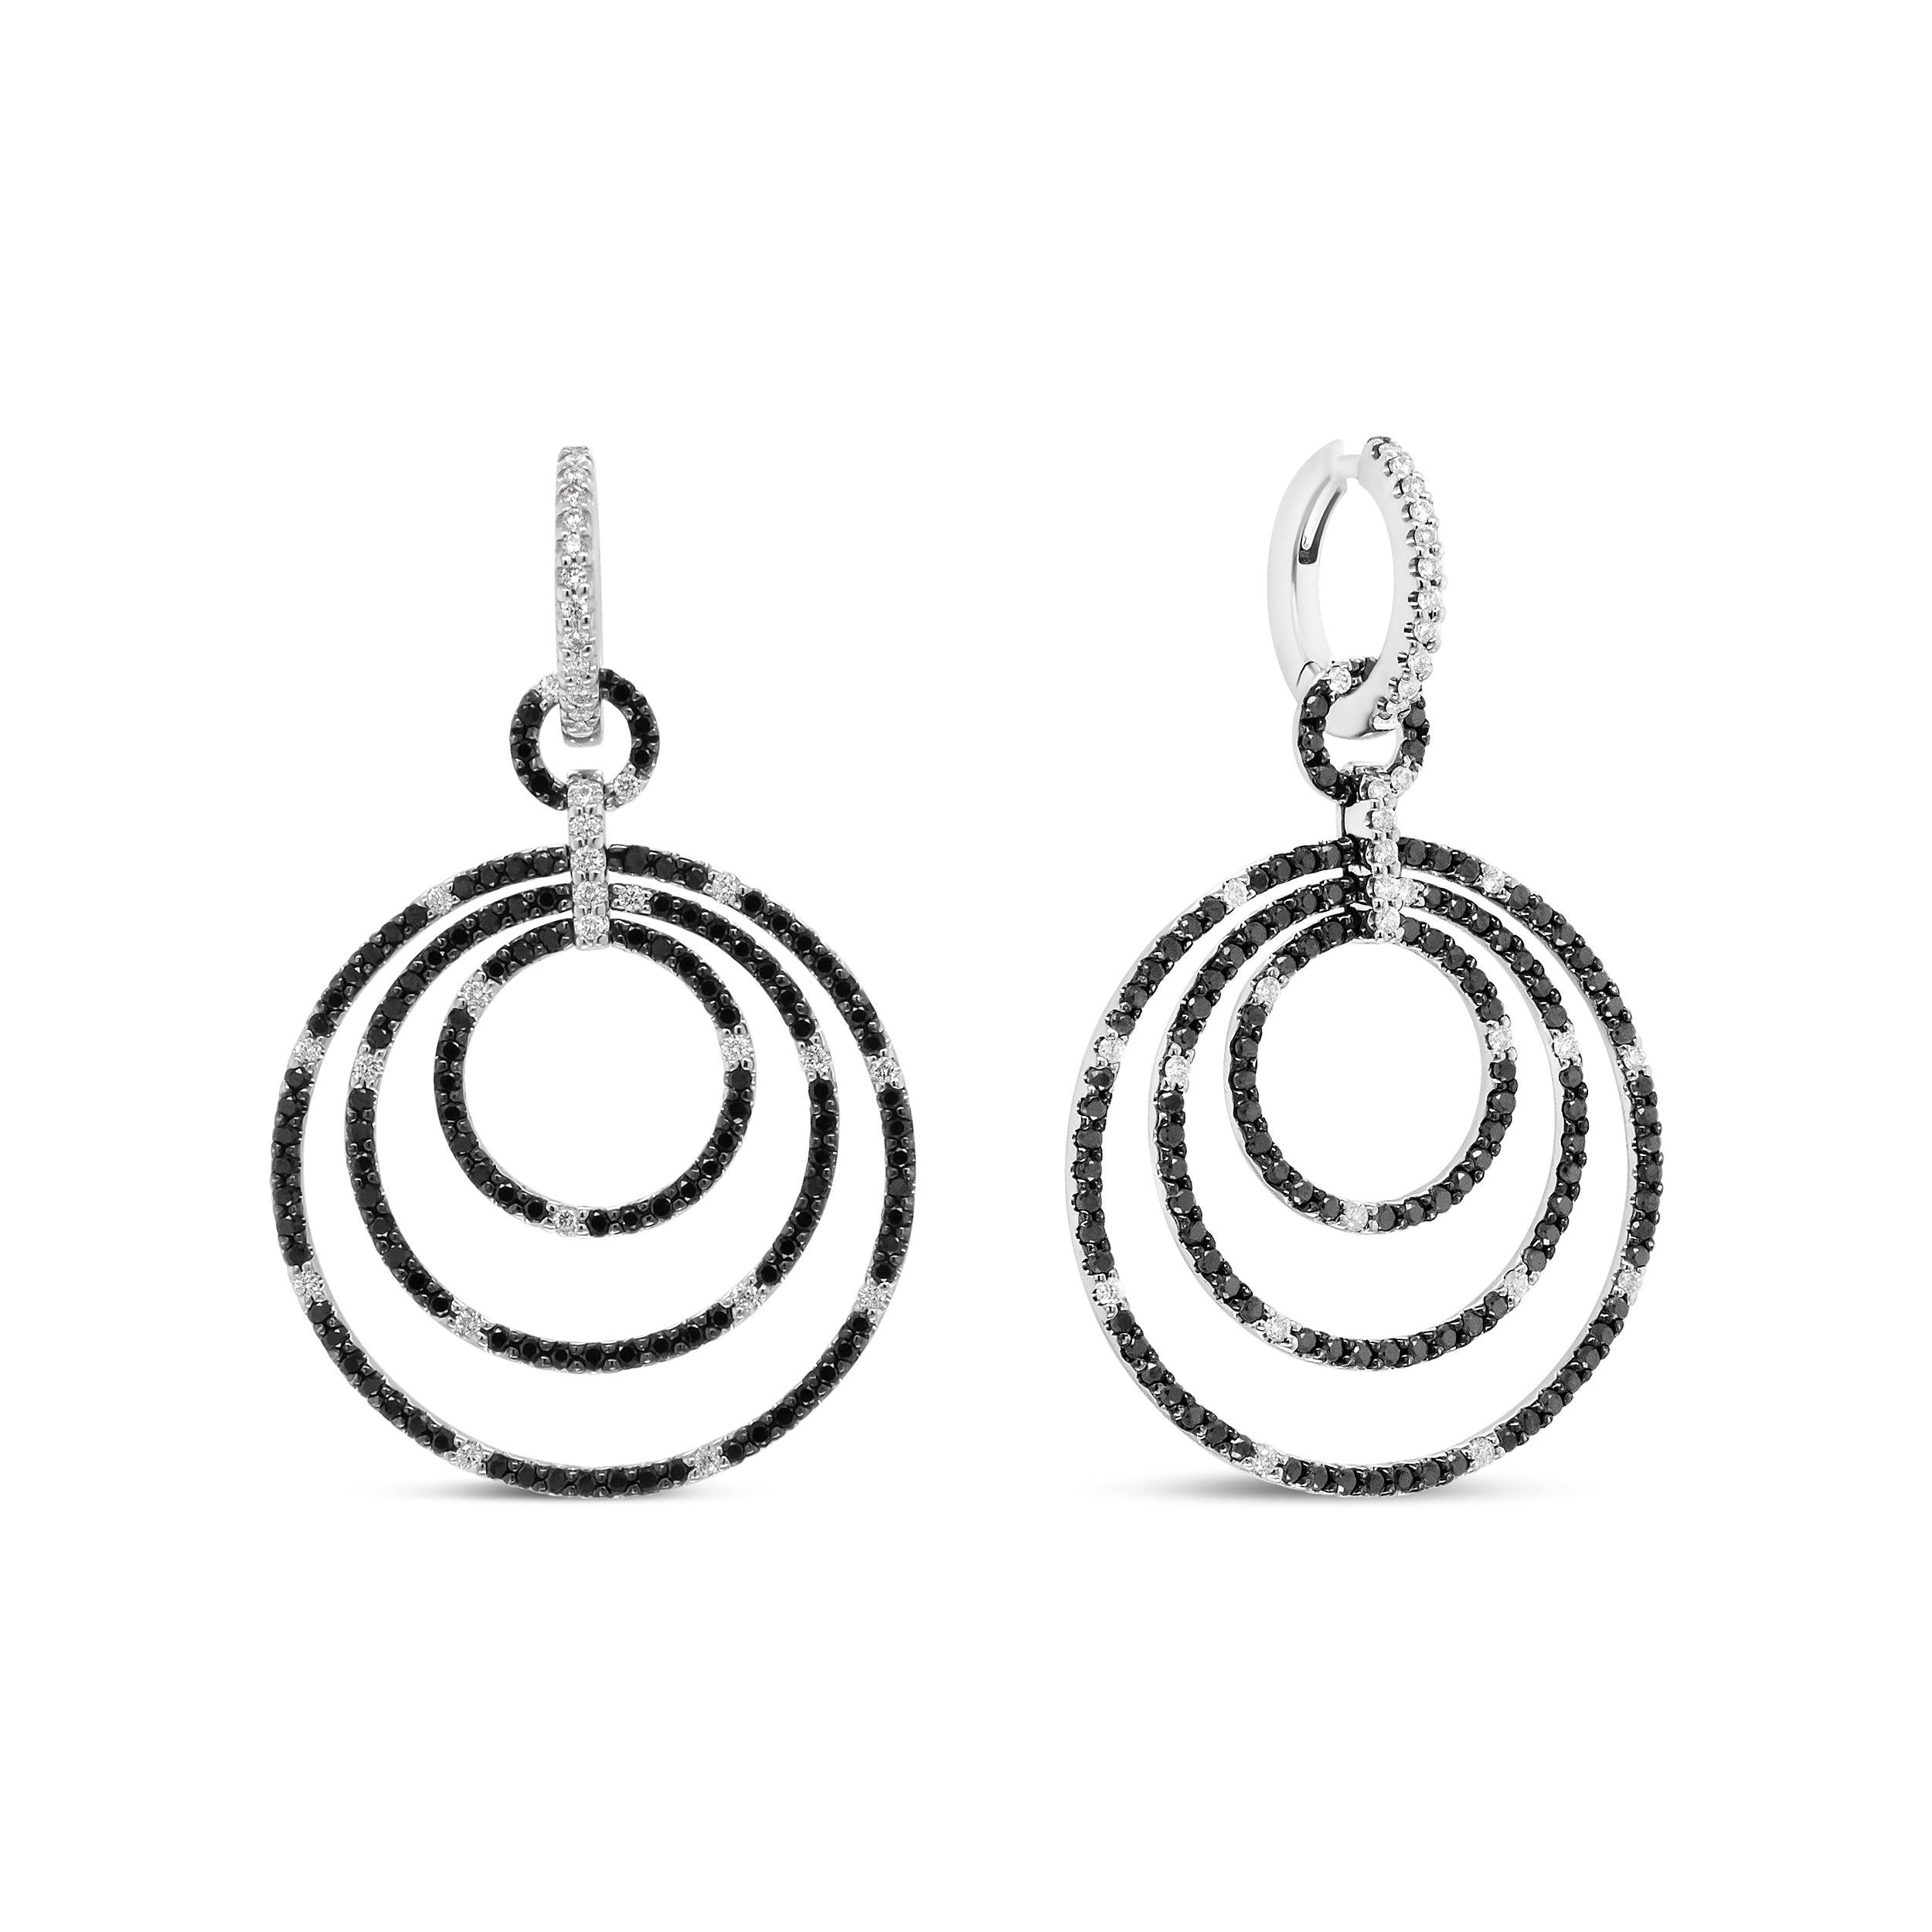 These diamonds dangle earrings are just like your favorite LBD in that they go with everything and are effortlessly timeless! Graduated hoops with a diameter of 14mm to 30mm showcase the splendor of a total 2 1/3 cttw round diamonds with an